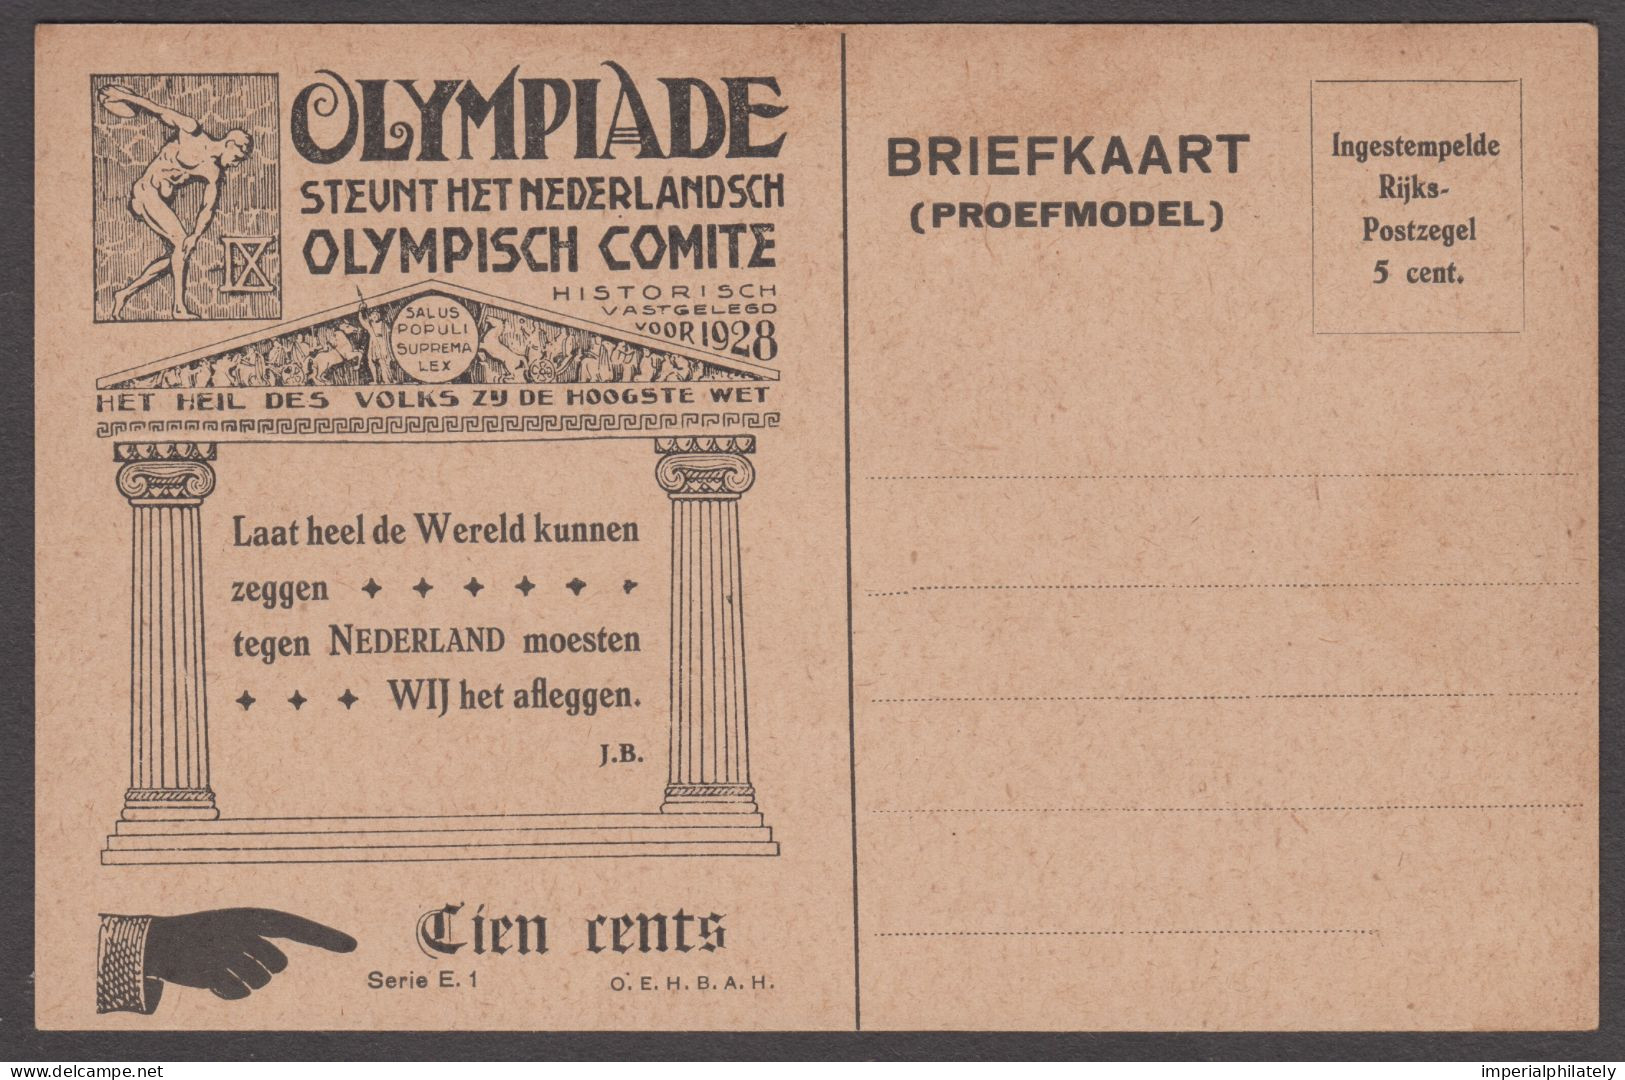 1928 Amsterdam 5c Postal Stationery Card Proof ("proefmodel") By Huygens, Series E.1 - Sommer 1928: Amsterdam